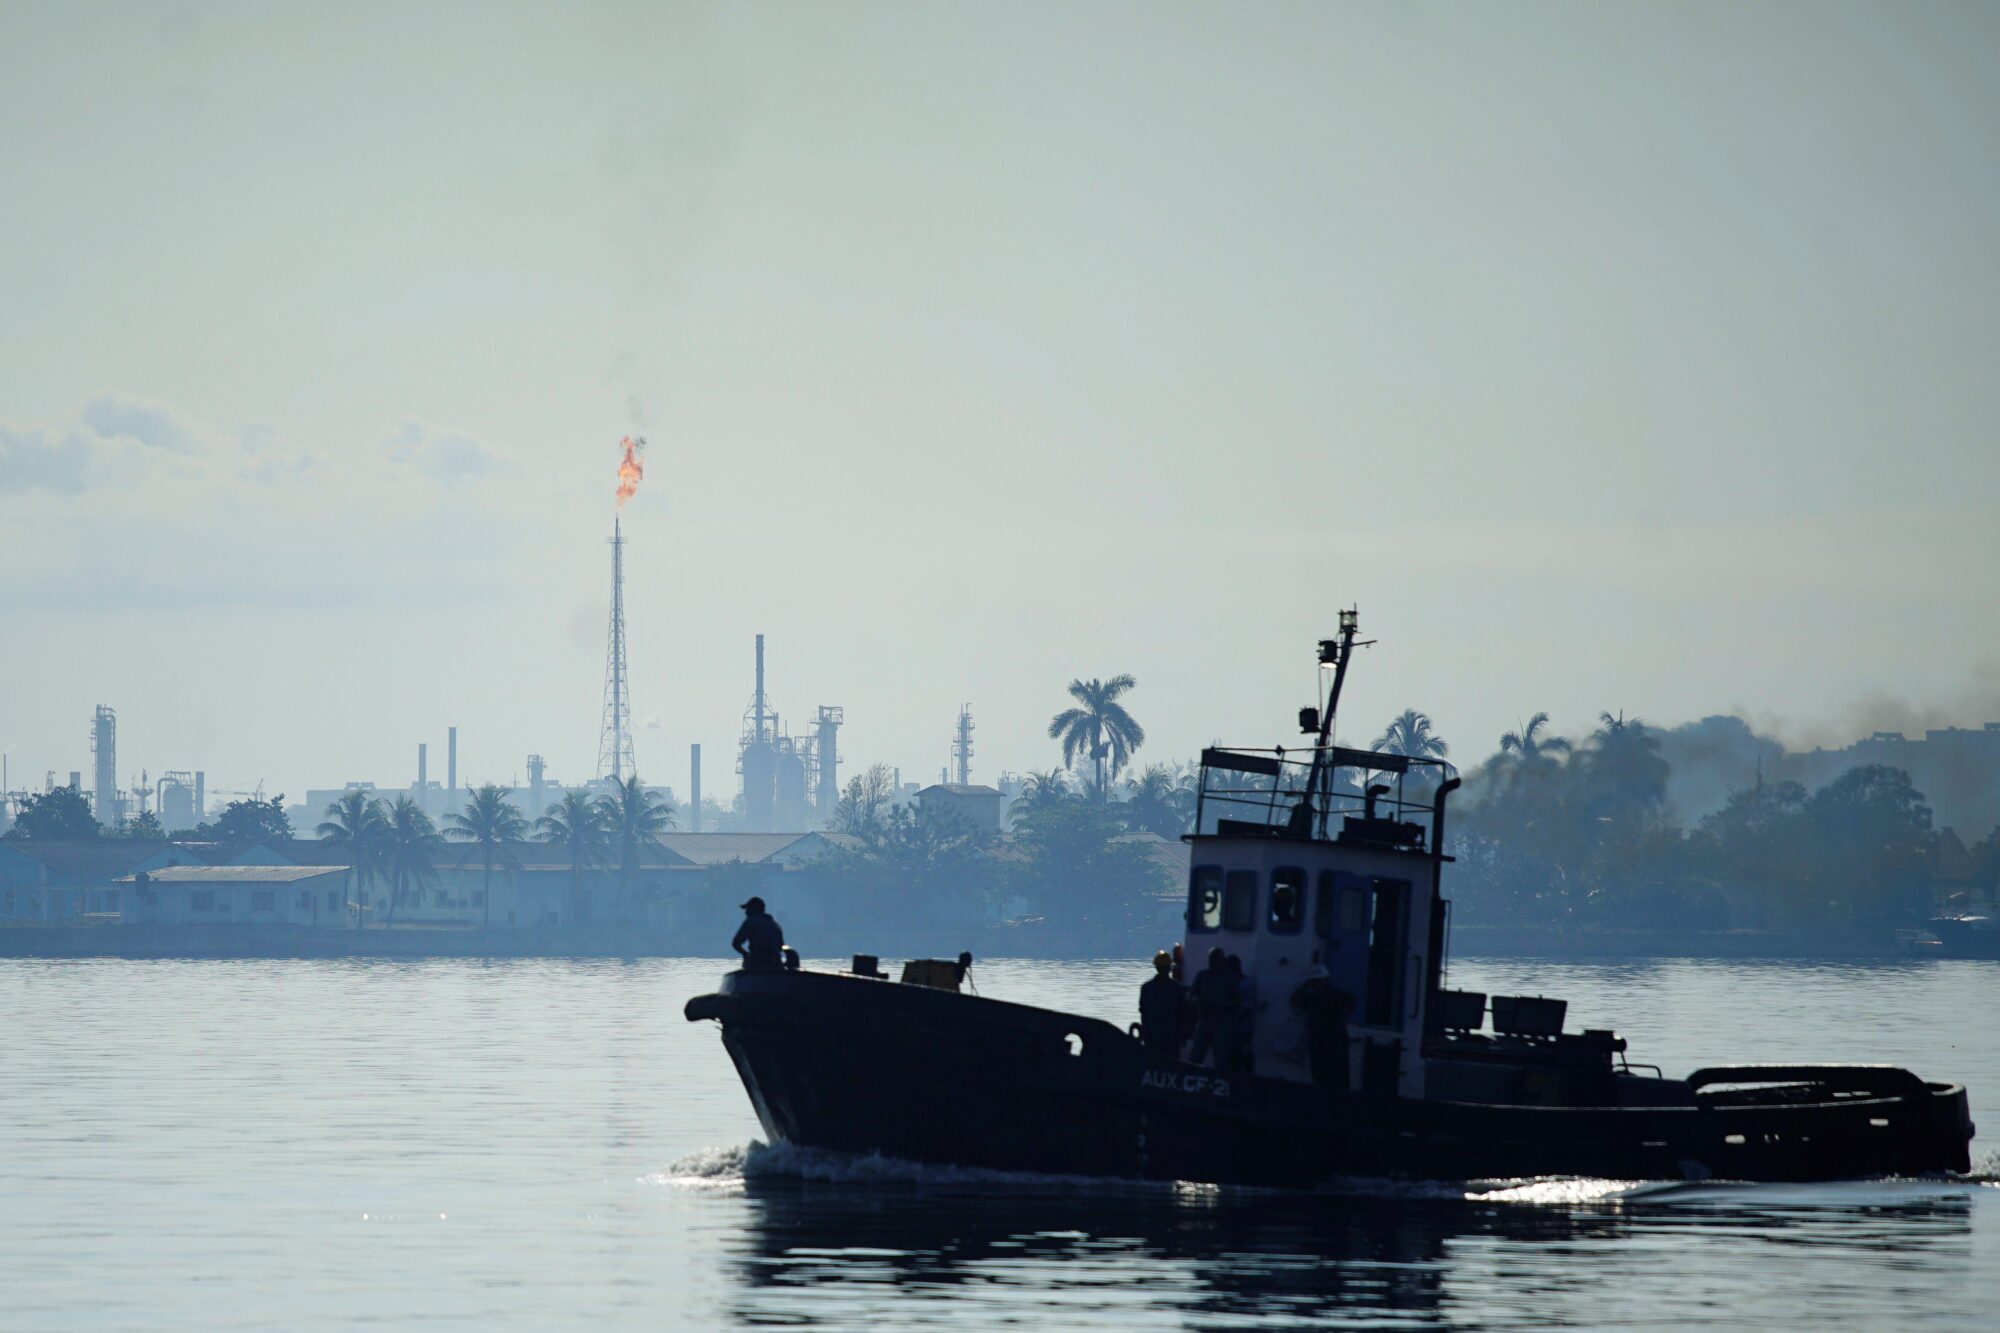 <p>A boat passes the Nico López oil refinery in the Havana bay, Cuba. The island nation derives 95% of its electricity from fossil fuels, but hopes its new membership of China&#8217;s Belt and Road Energy Partnership may kick-start its stuttering drive to increase its renewable energy capacity. (Image: Alexandre Meneghini / Alamy)</p>